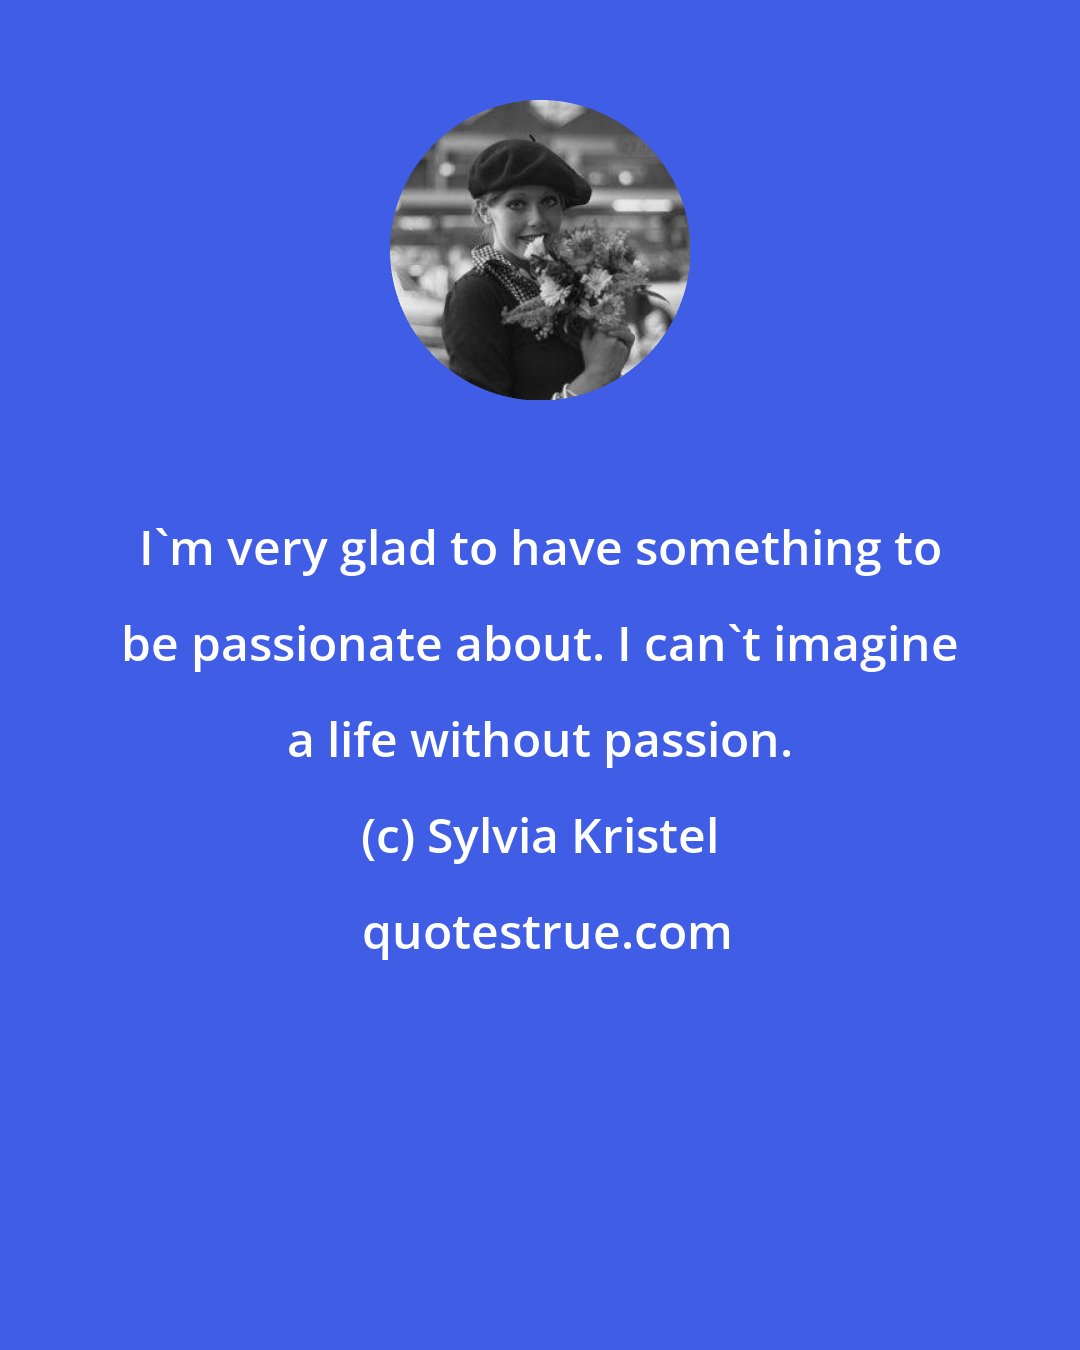 Sylvia Kristel: I'm very glad to have something to be passionate about. I can't imagine a life without passion.